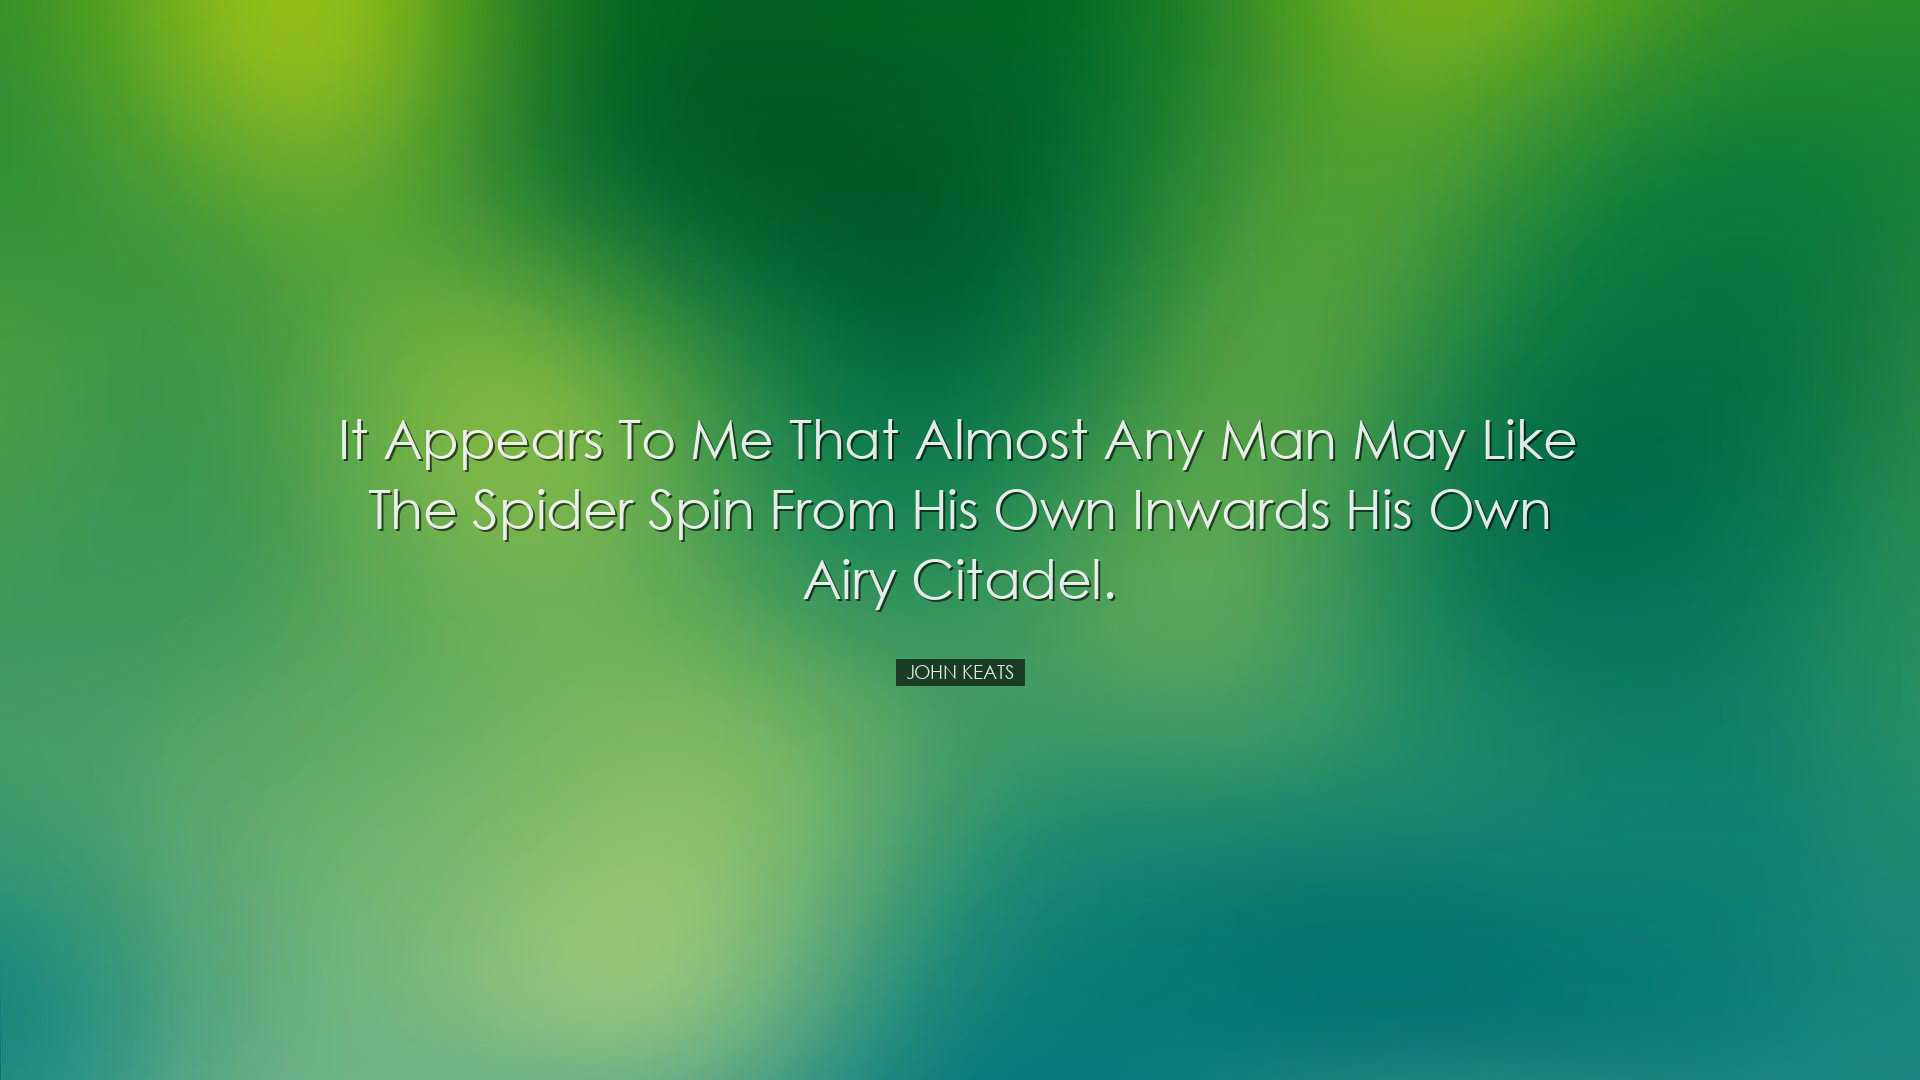 It appears to me that almost any man may like the spider spin from